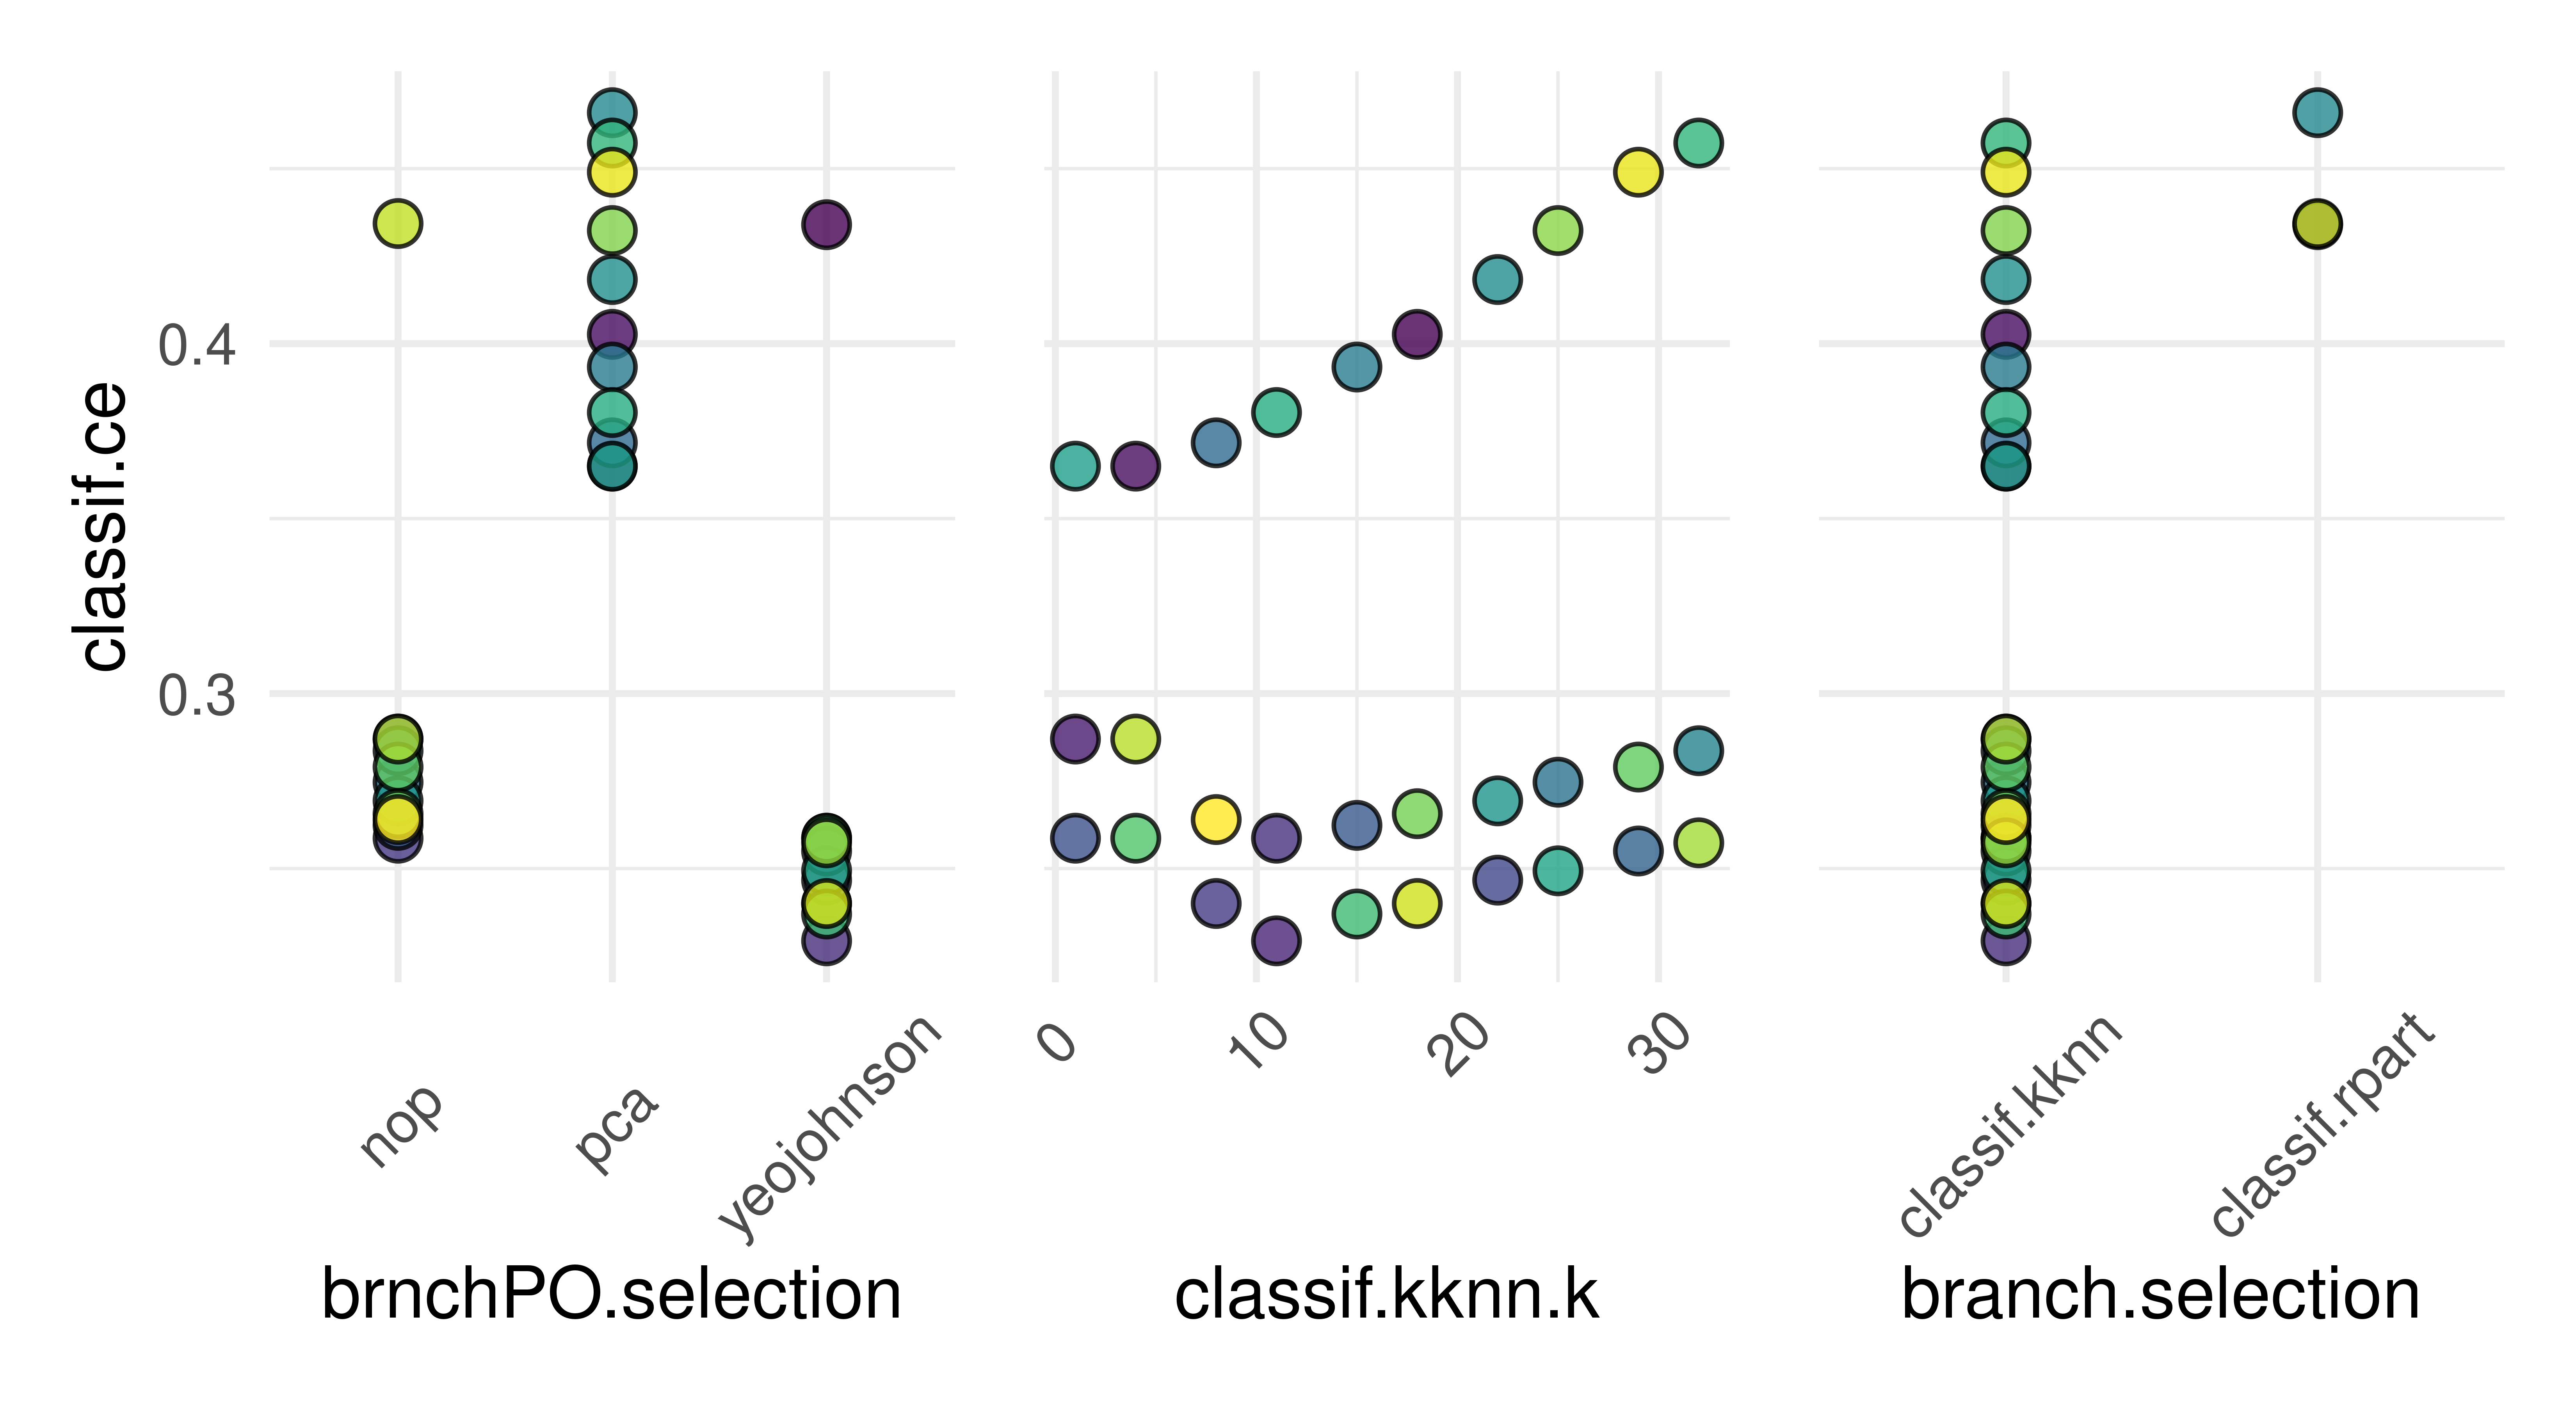 Three scatter plots all with y-axis 'classif.ce' from around 0.25 to 0.5. Left plot is 'brnchPO.selection', middle is 'classif.knn.k', right is 'branch.selection'. x-axis text is the hyperparameter values to tune. Each 'row' of the y-axis indicates a different hyperparameter configuration (also separated by colored dots). The bottom row (and therefore best configuration) is at around 0.22 and shows the same results as in the instance output. Other 'rows' show a trade-off between KKNN `k` parameter, choice of learner, and choice of operators.